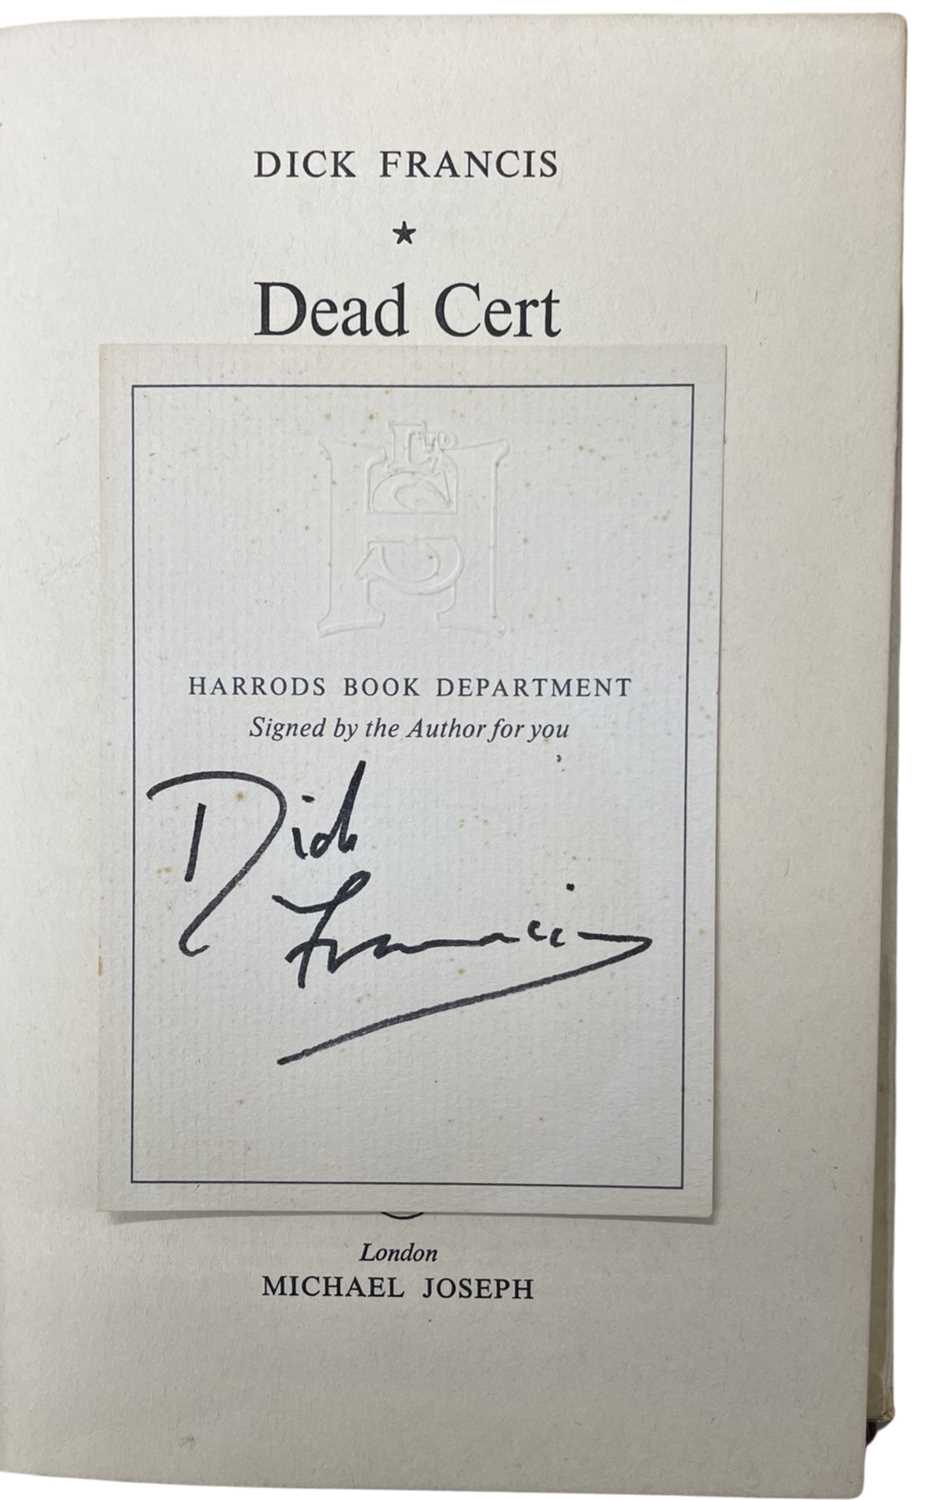 Francis (Dick), Dead Cert, First Edition 1962 Signed by the Author - Image 3 of 4